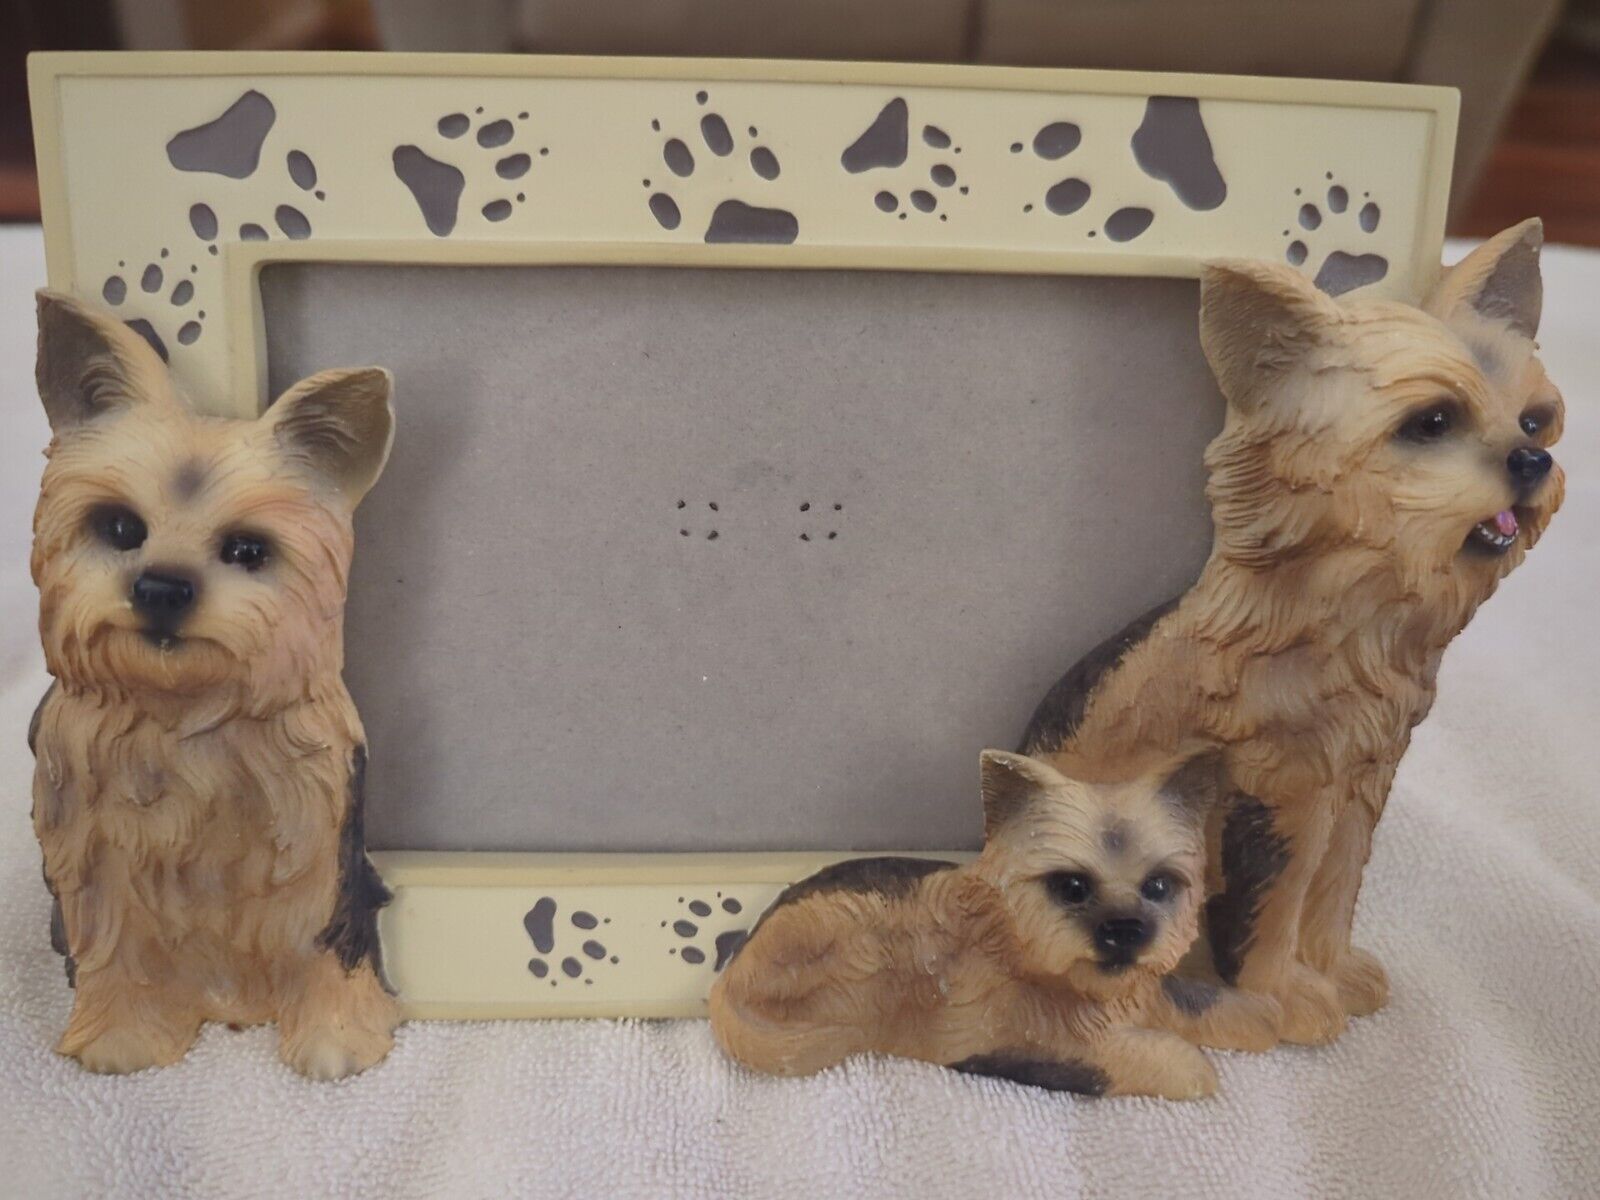 RESIN 3-D YORKSHIRE TERRIER DOG BREED TABLETOP PICTURE PHOTO FRAME 4 X 6